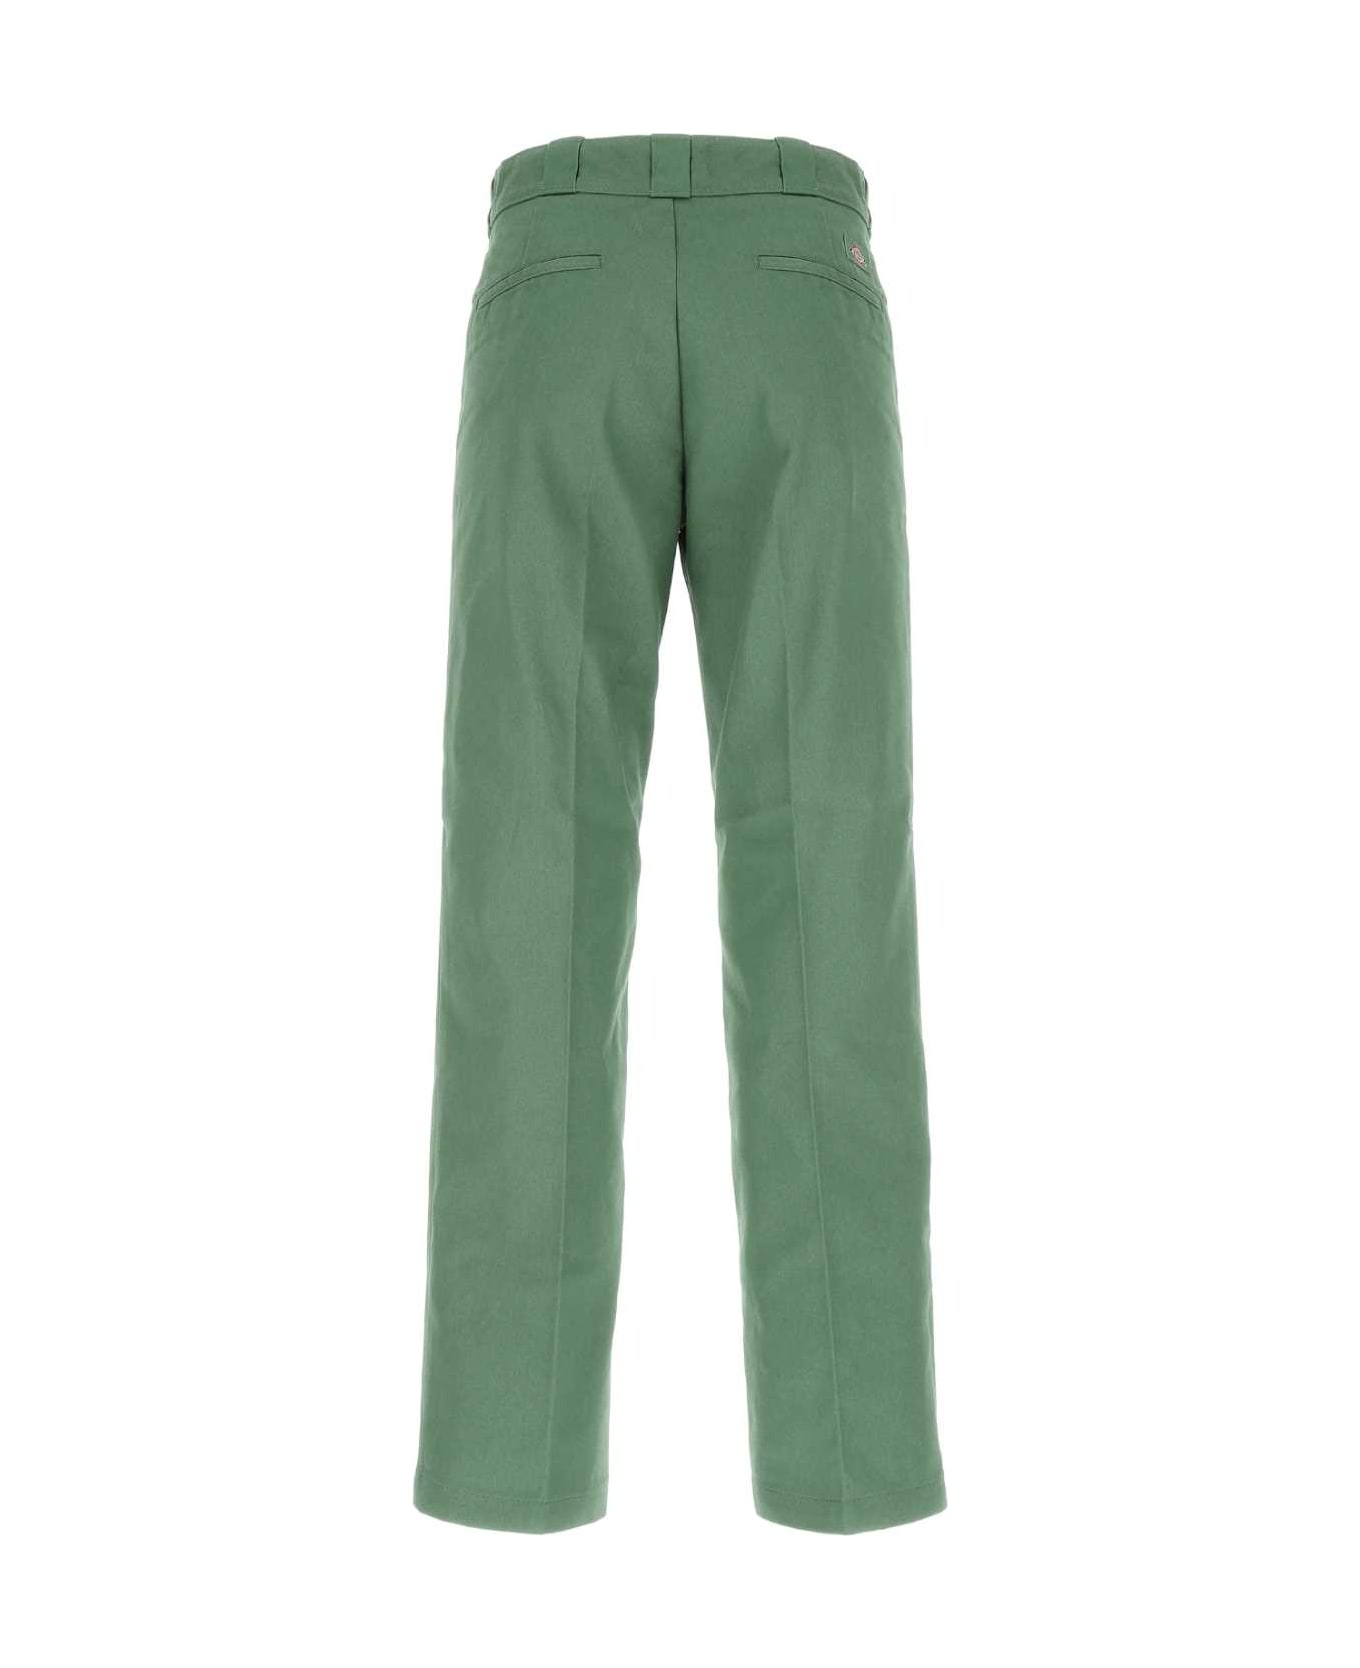 Dickies Green Polyester Blend Pant - C971 ボトムス